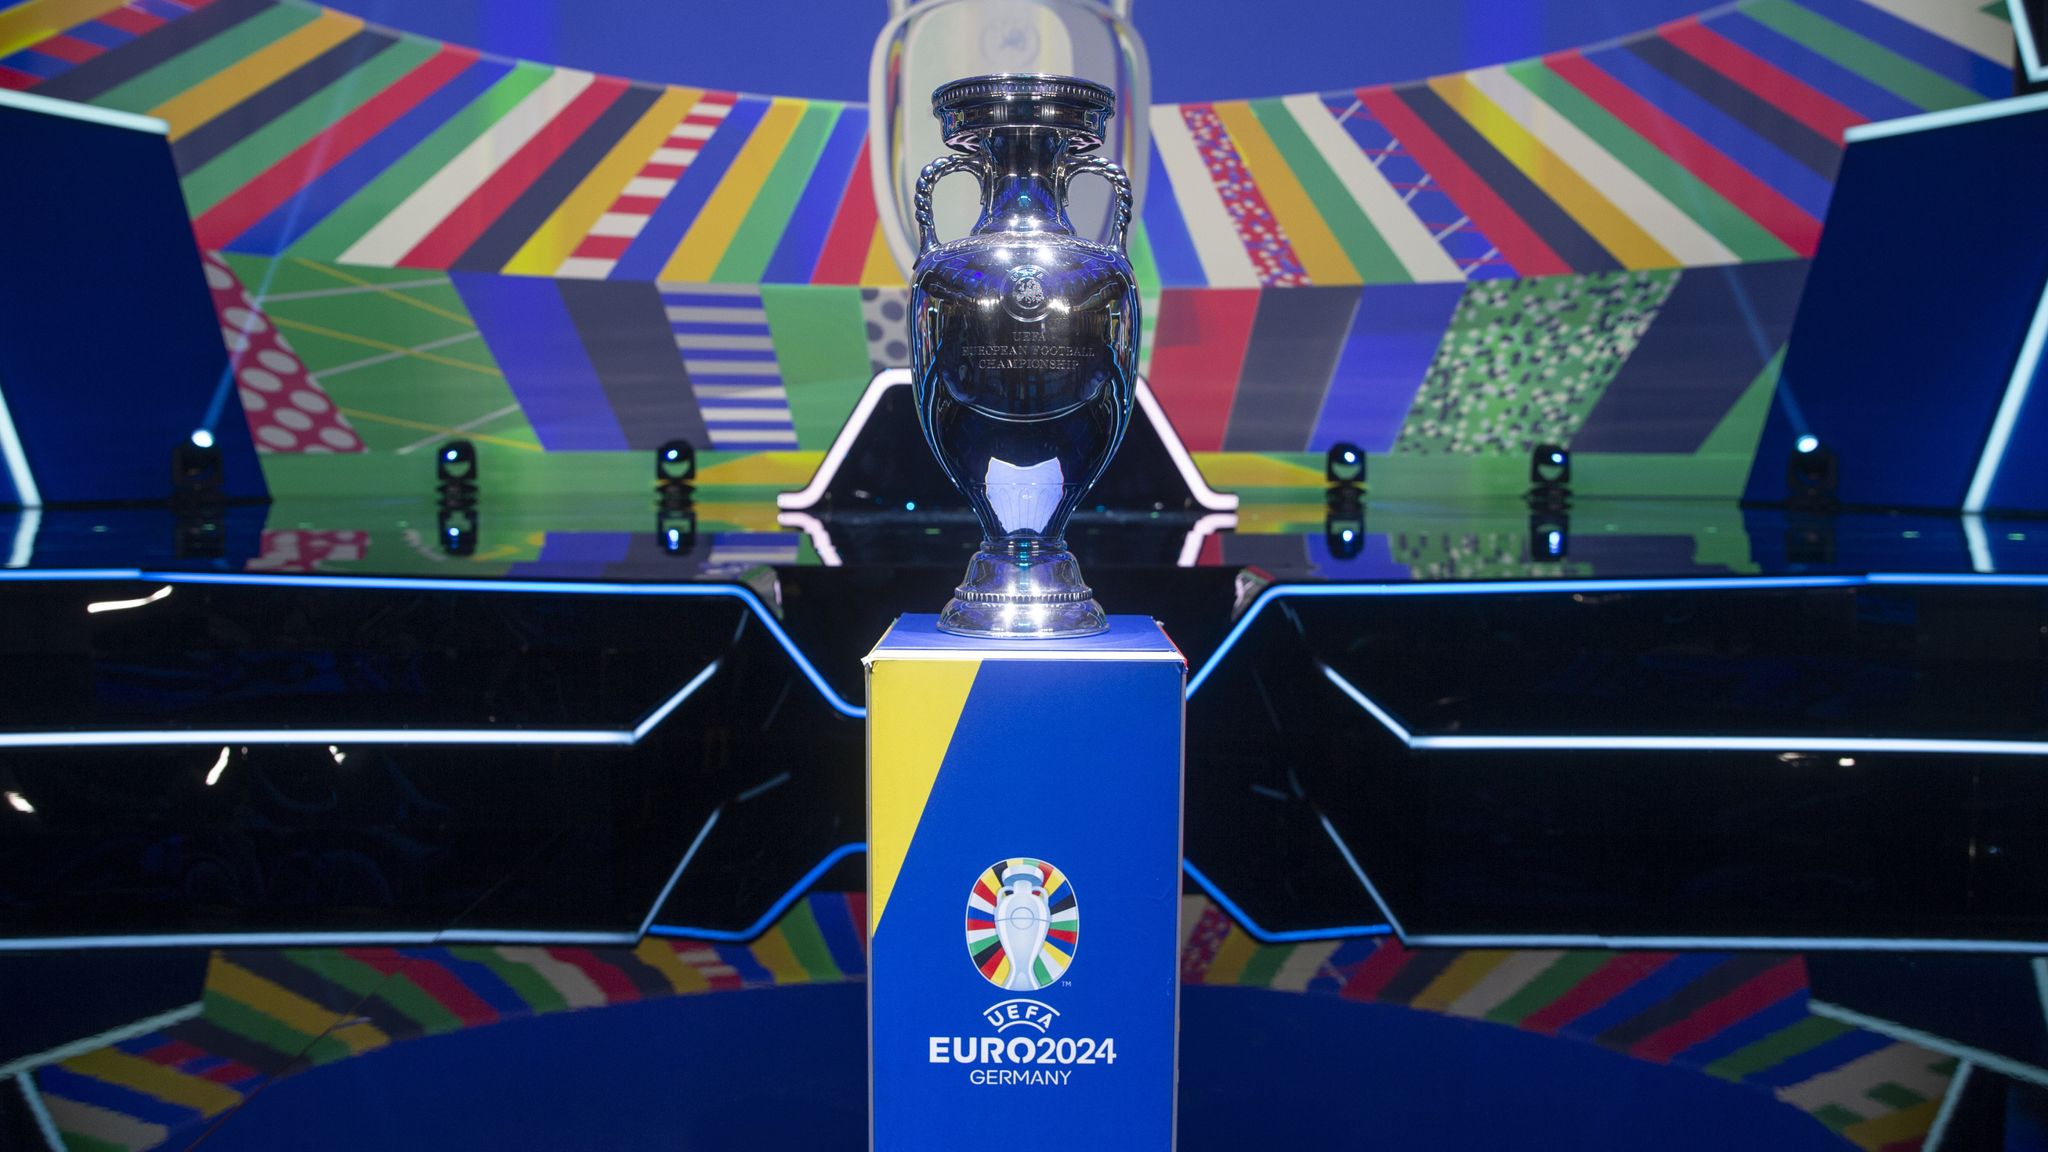 Euro 2024 fixtures, schedule, teams, venues All you need to know about